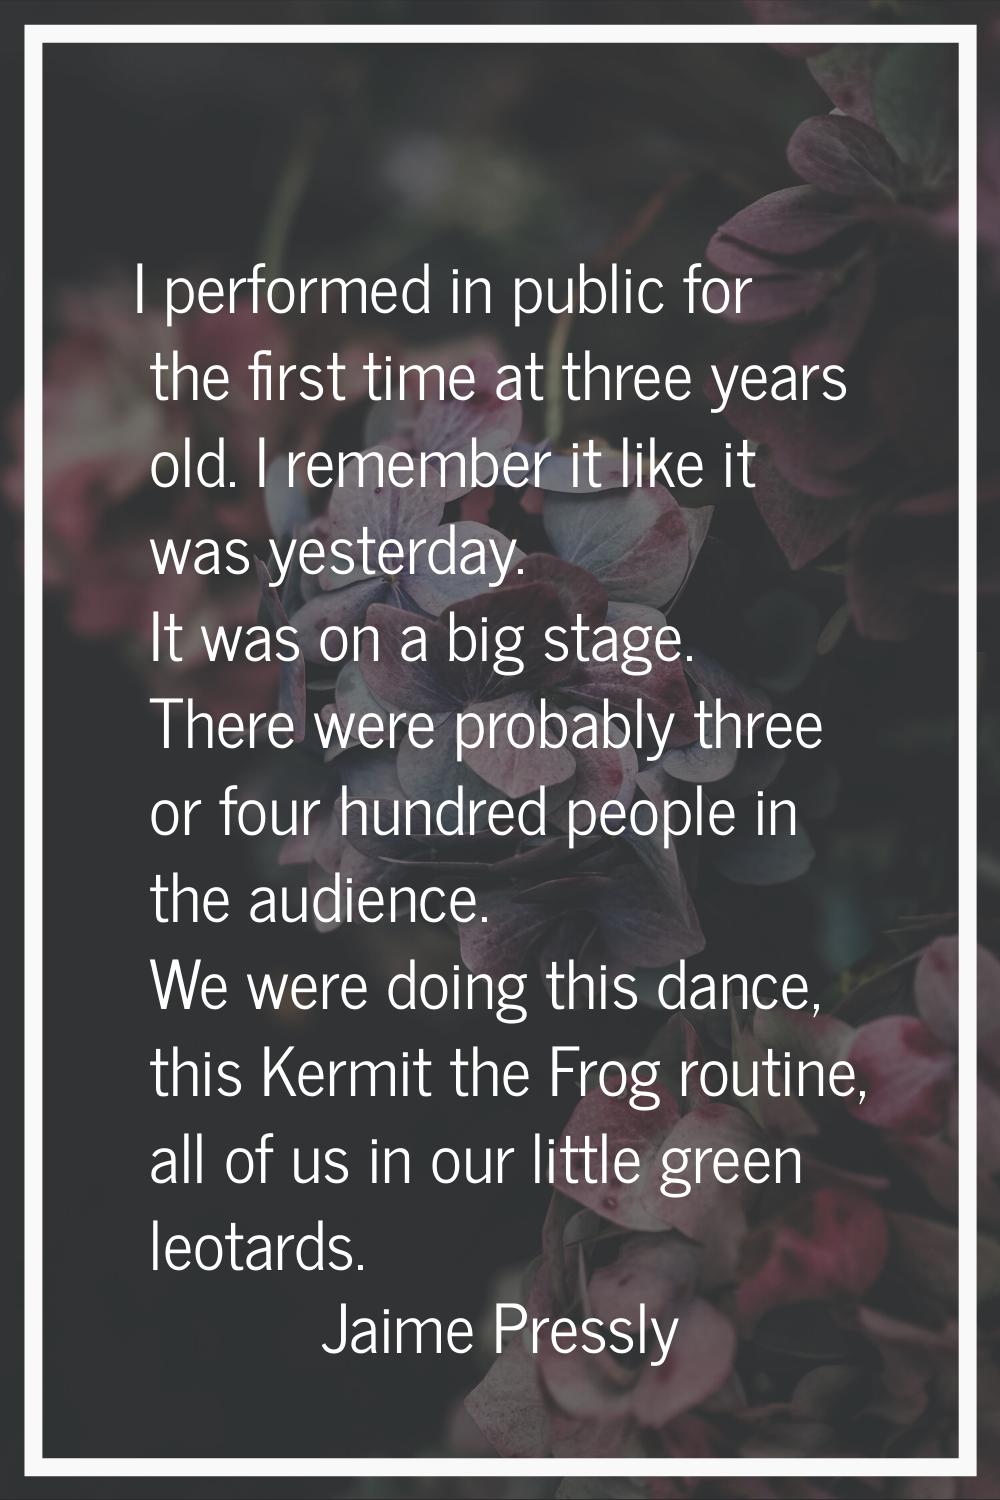 I performed in public for the first time at three years old. I remember it like it was yesterday. I